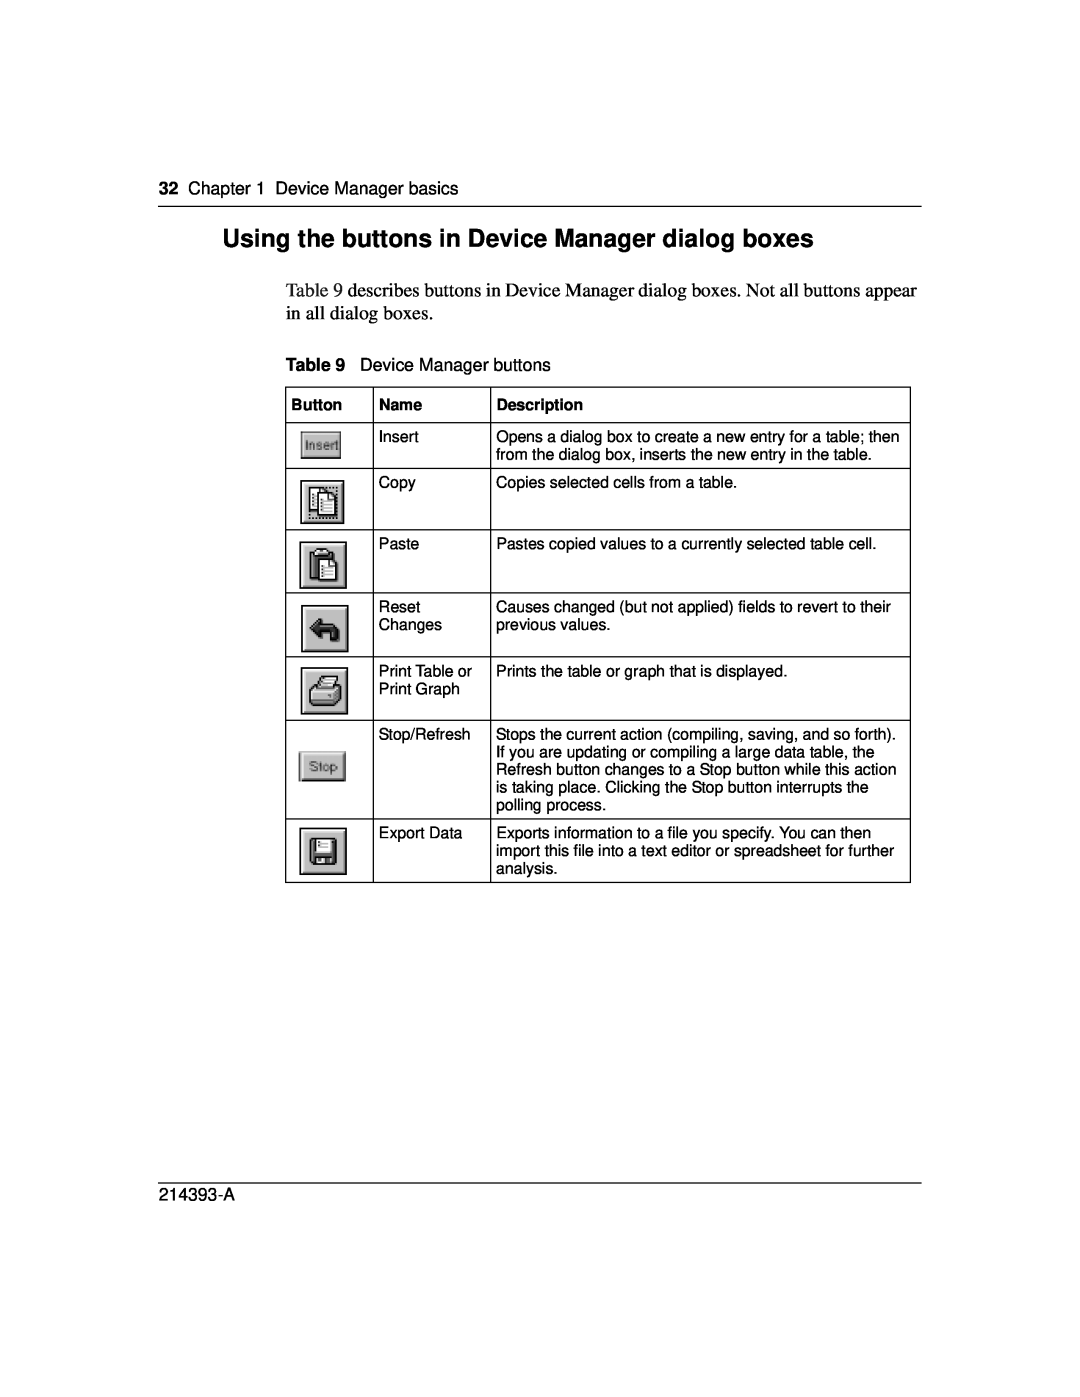 Nortel Networks 214393-A Using the buttons in Device Manager dialog boxes, 32Chapter 1 Device Manager basics, Button, Name 